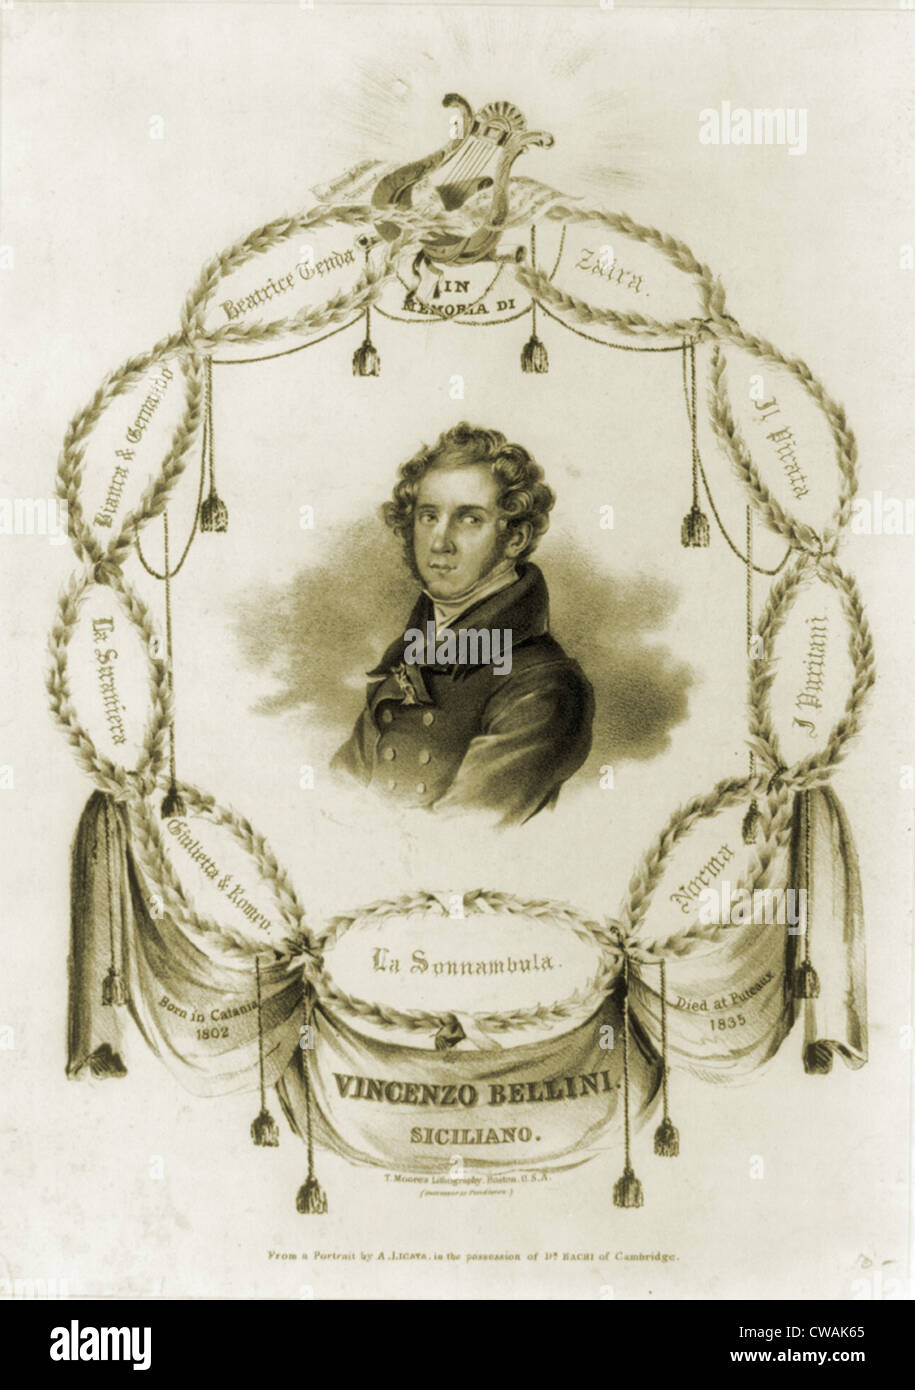 Vincenzo Bellini (1801-1835) Italian composer best known for the opera NORMA (1831). Stock Photo